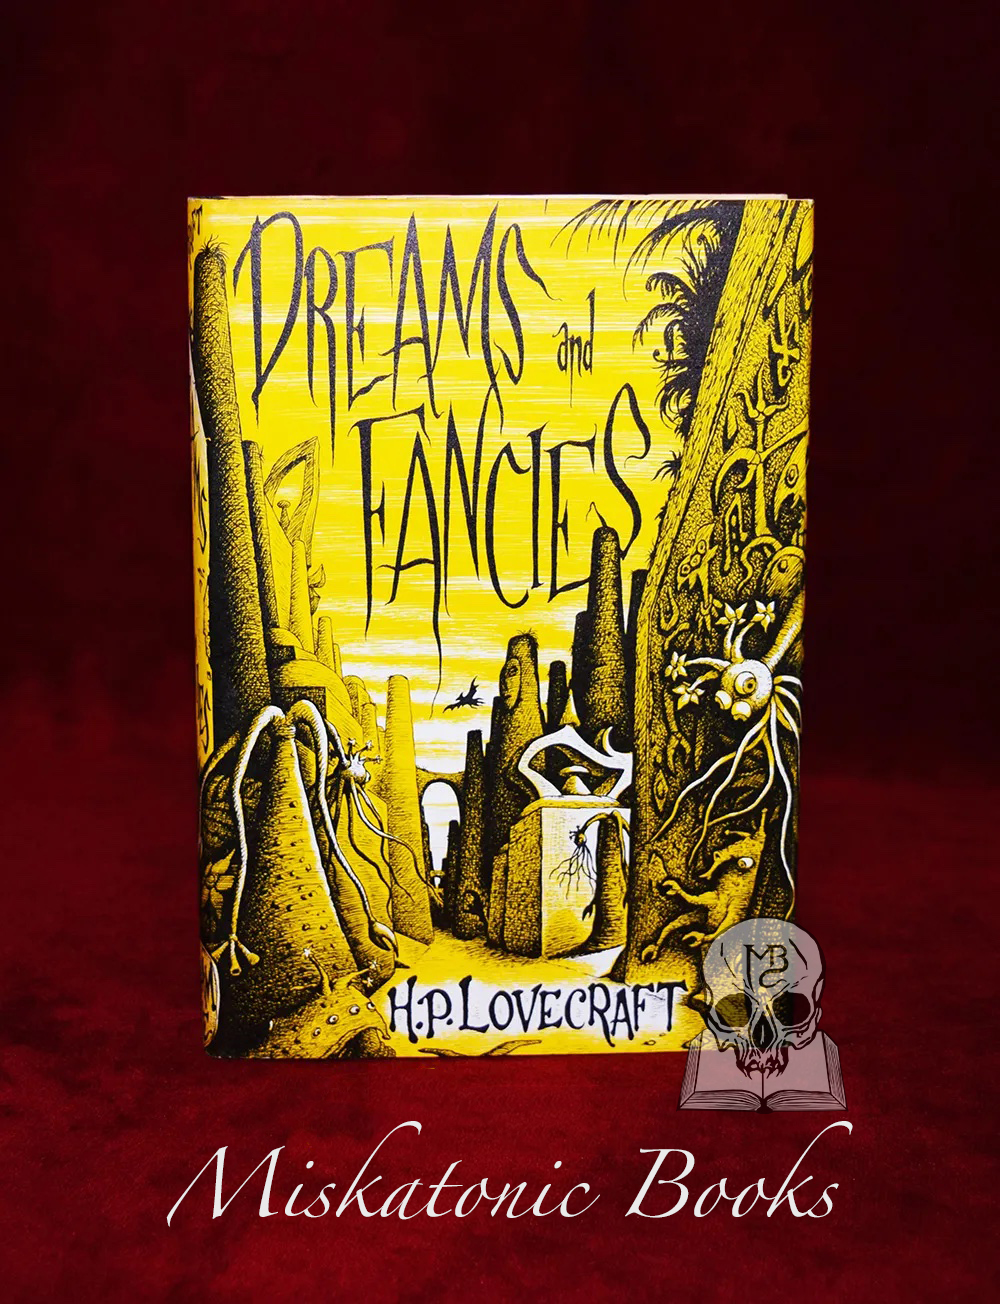 DREAMS AND FANCIES by H.P. Lovecraft - First Edition Hardcover